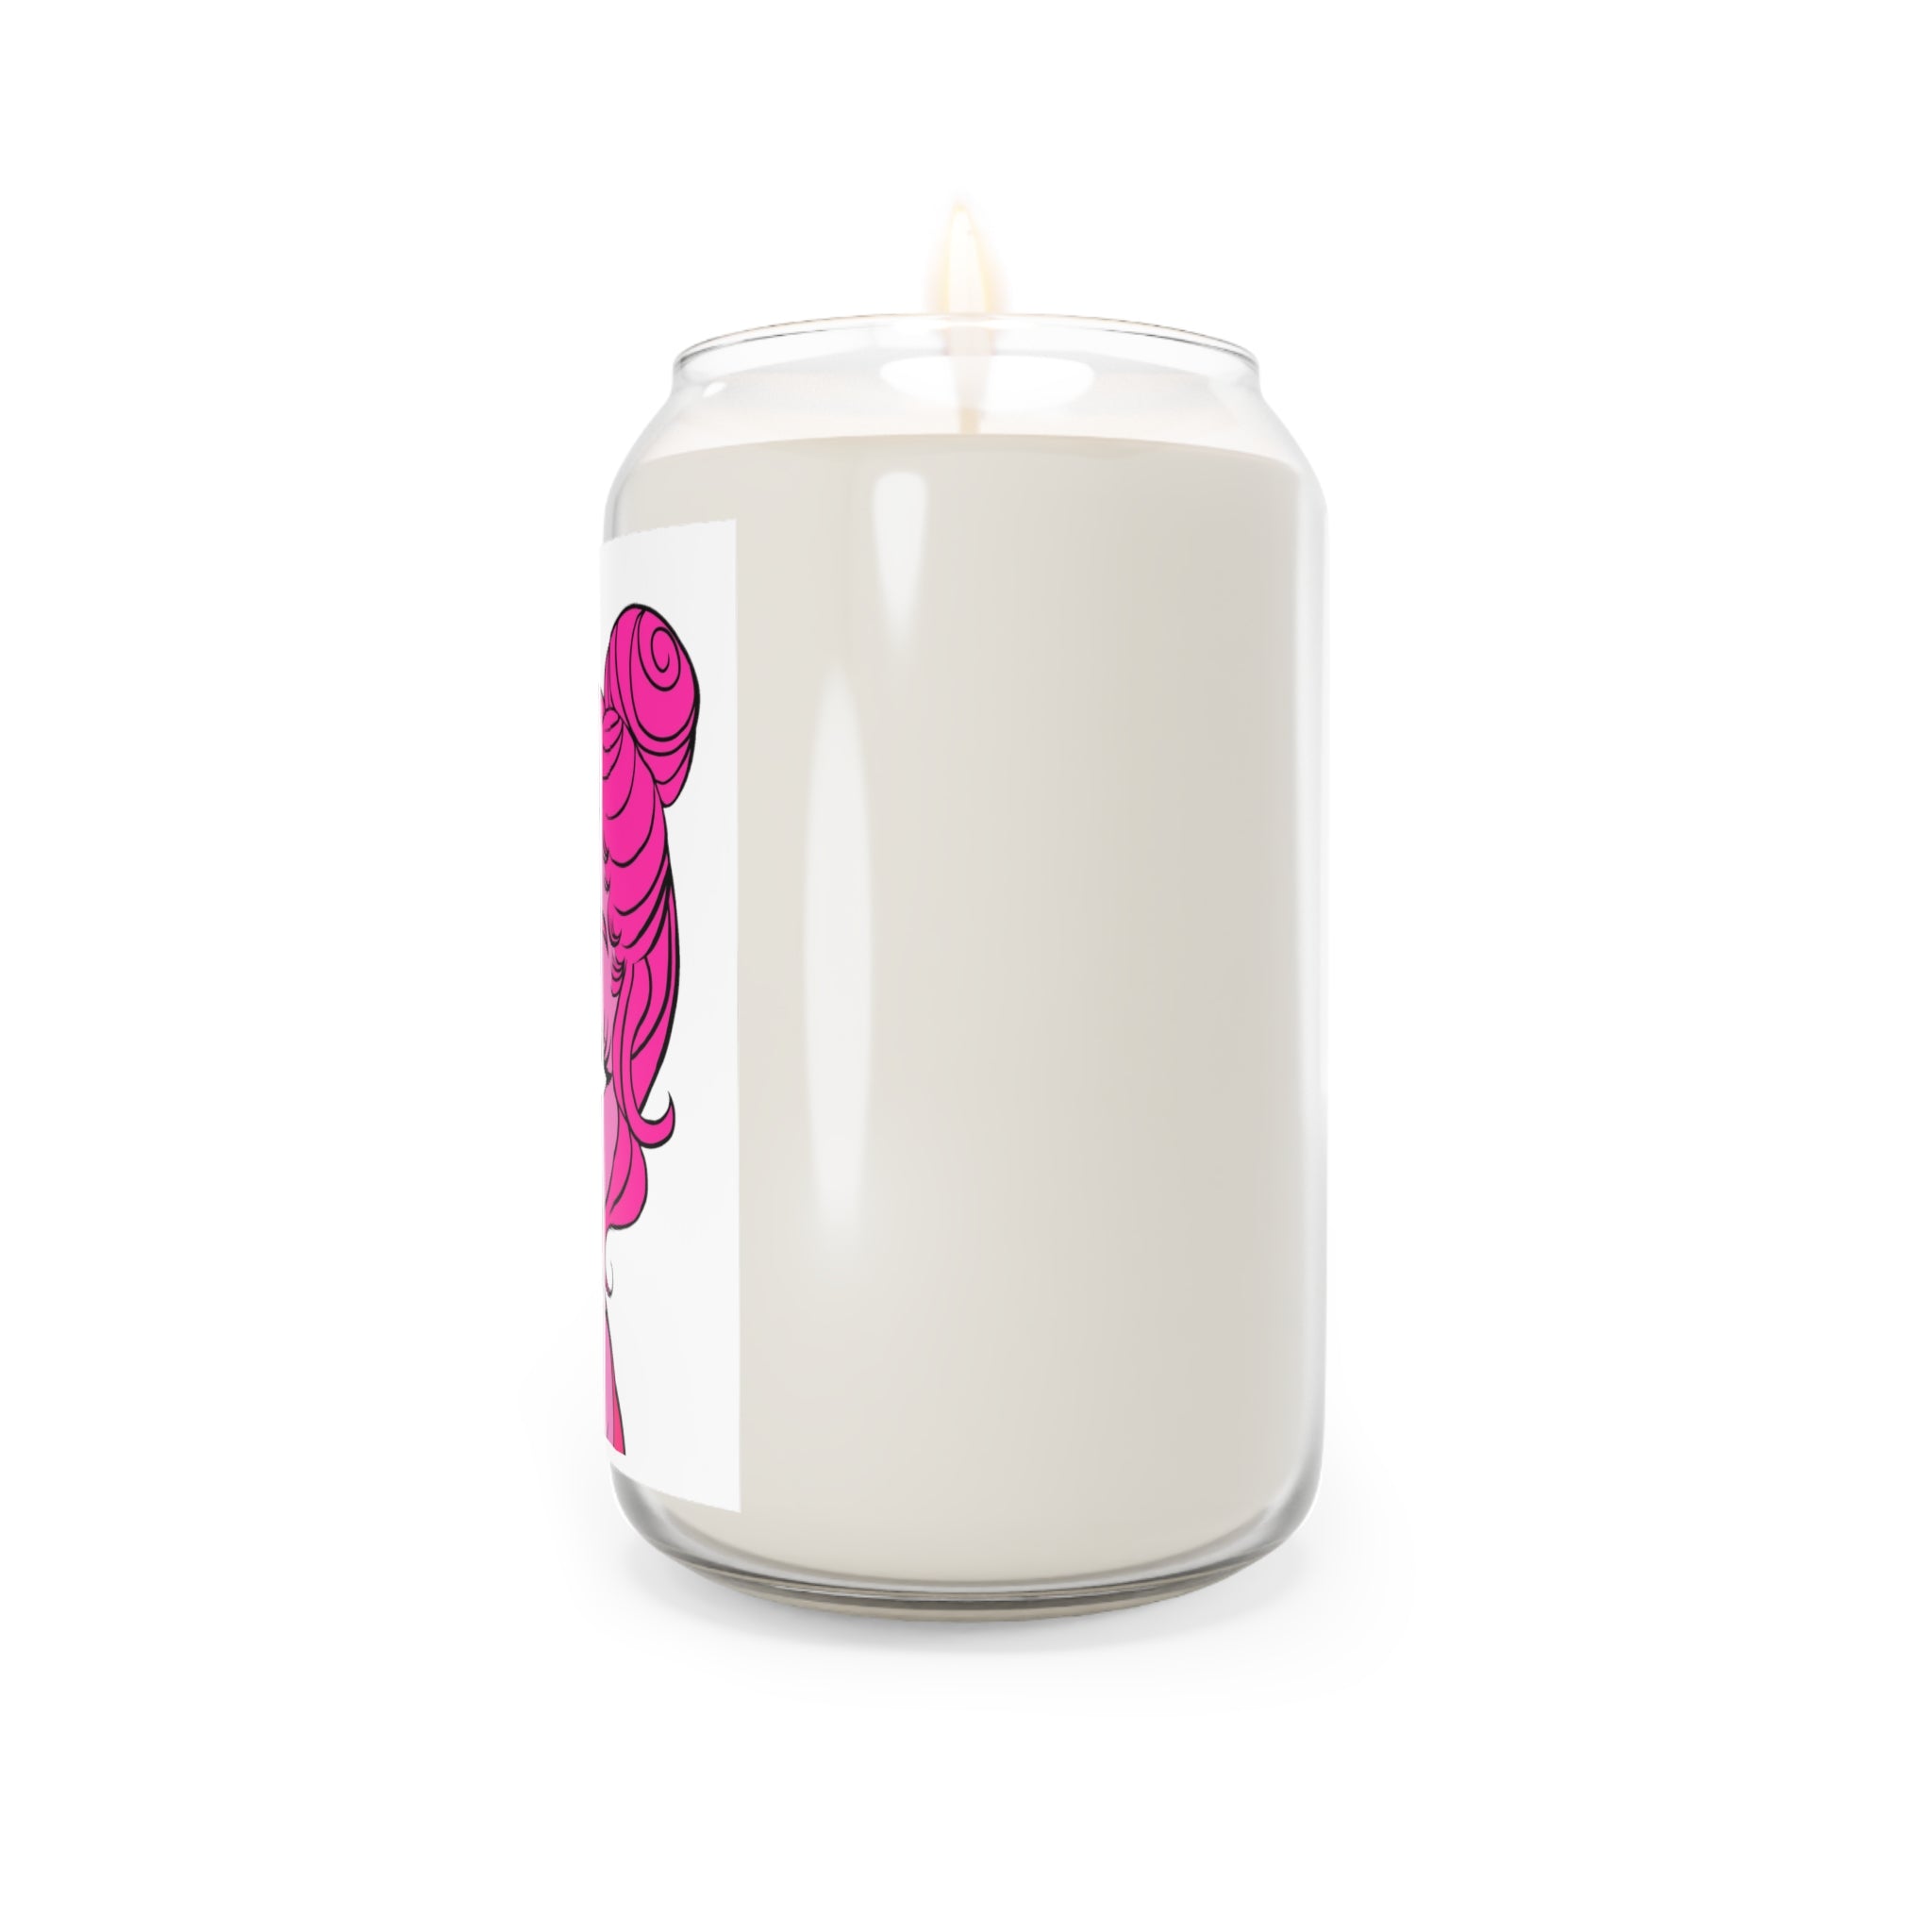 Miss Taurus Scented Candle LARGE